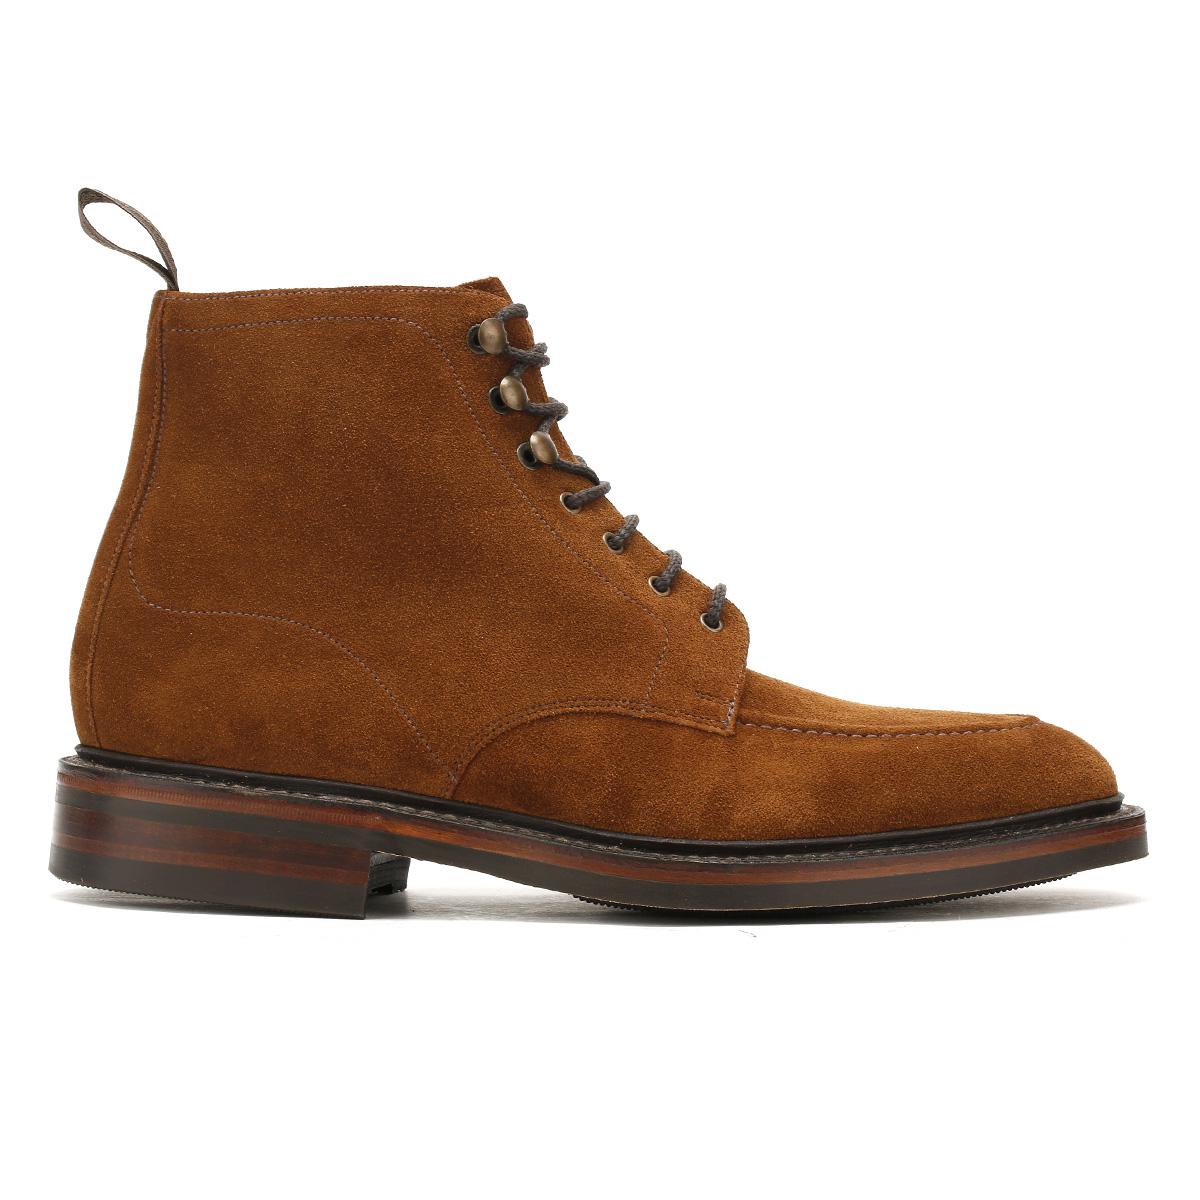 Lyst Loake Mens Tan Suede Anglesey Boots In Brown For Men 4444